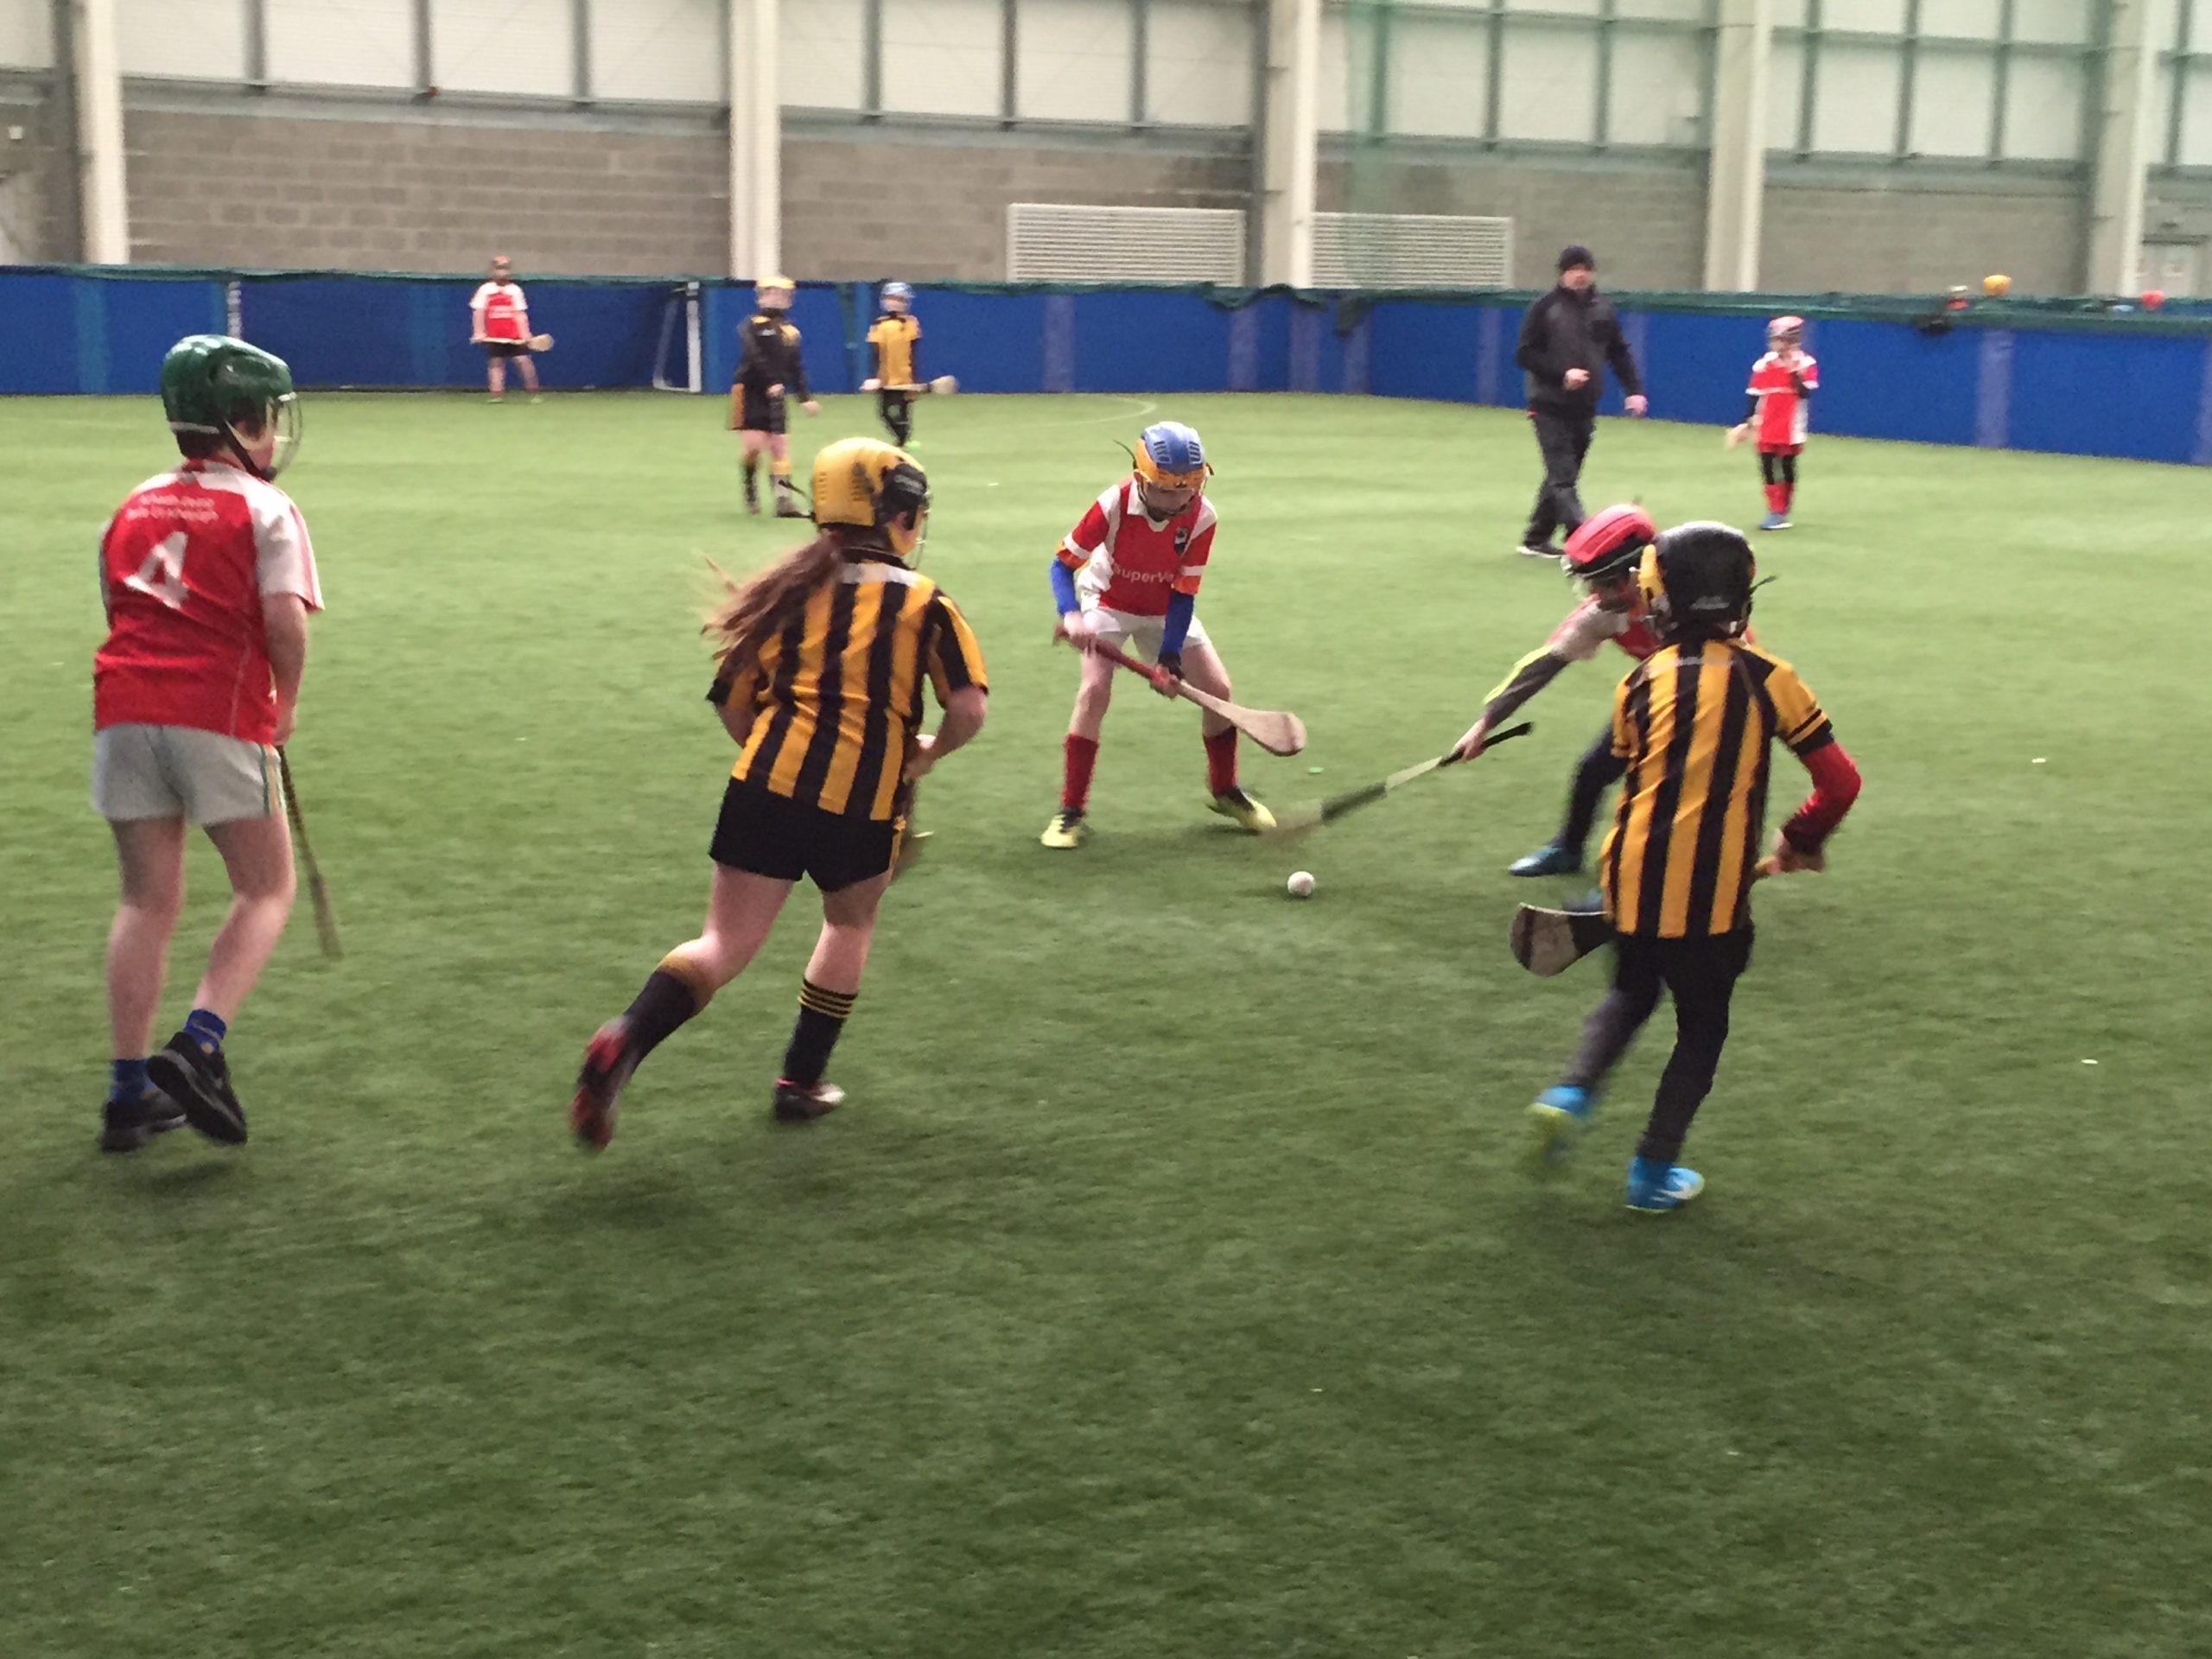 Ulster GAA’s indoor hurling programme enables young Hurlers to enjoy the game